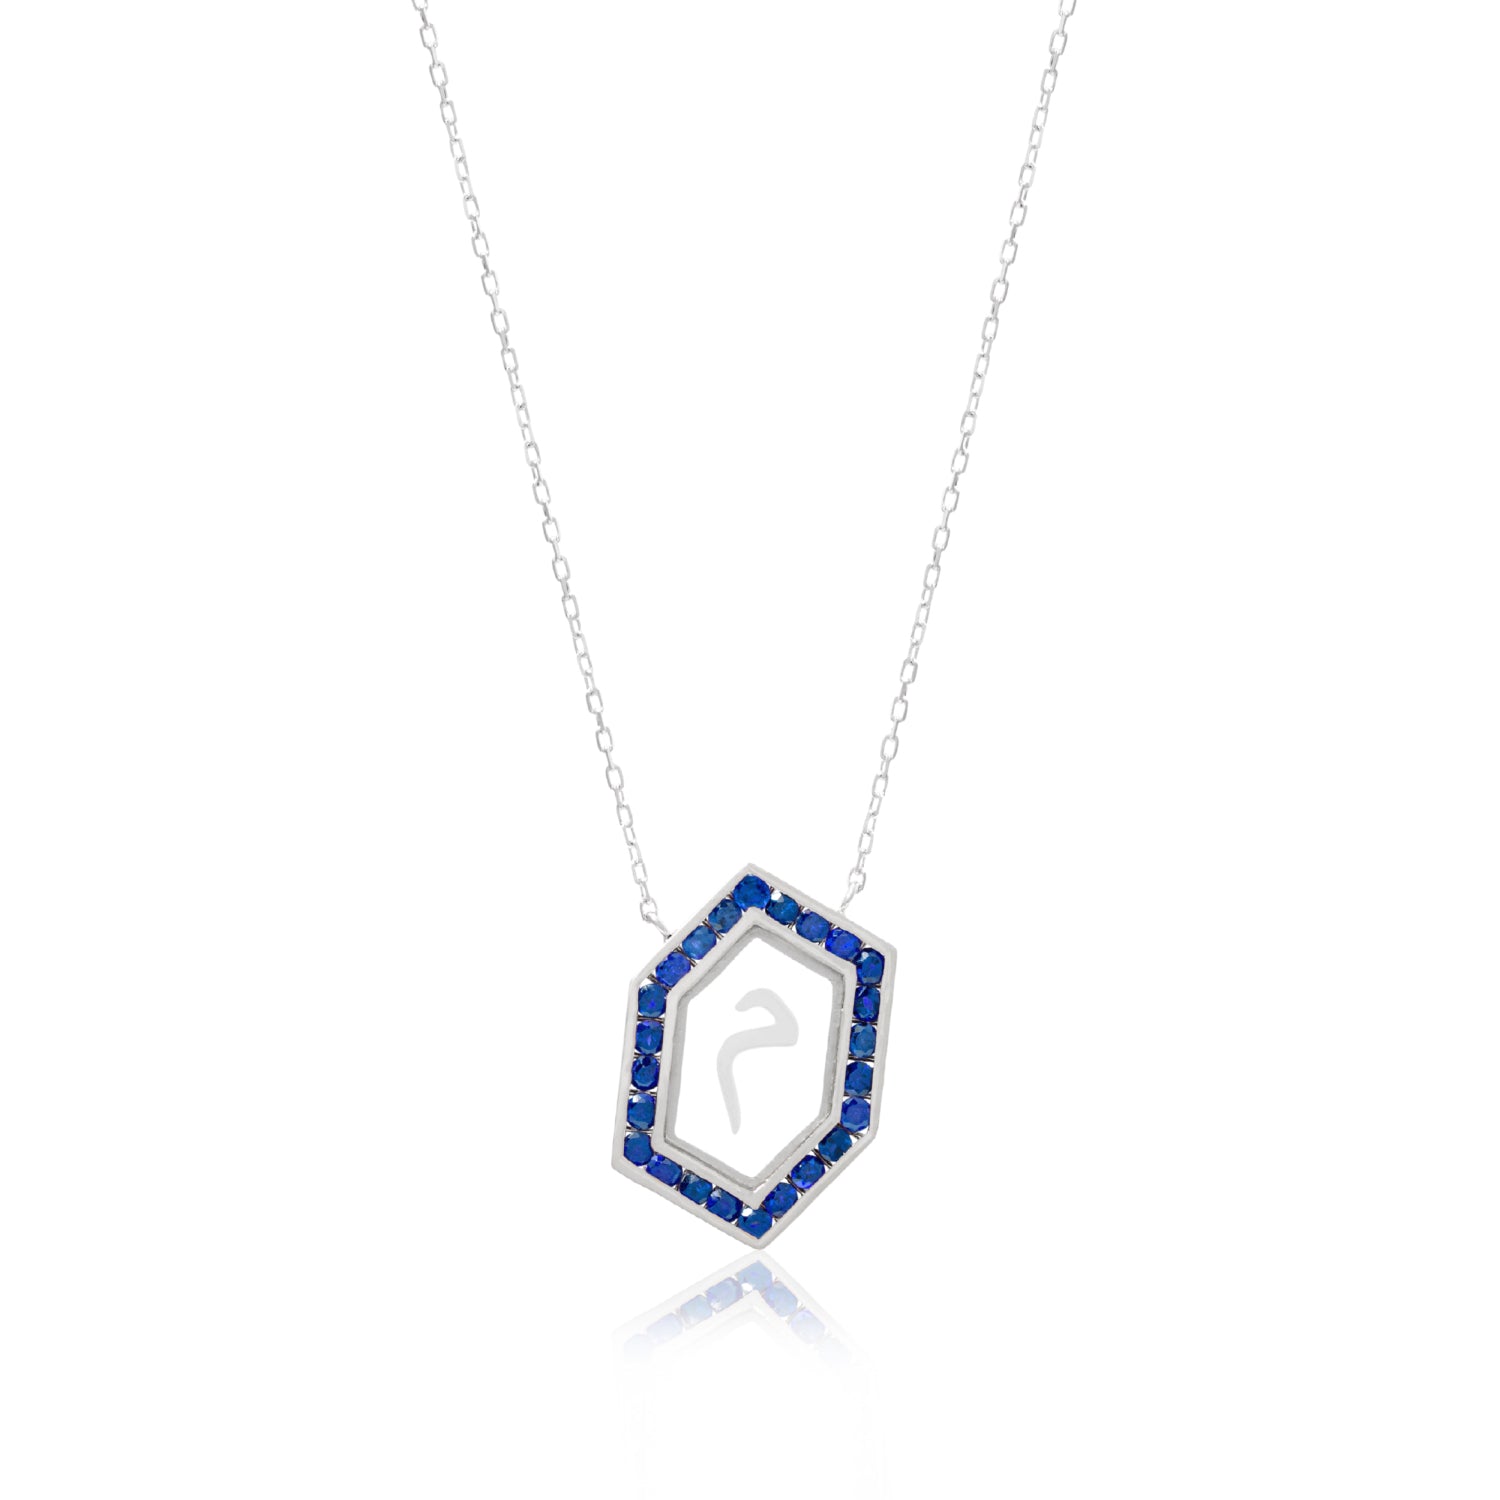 Qamoos 1.0 Letter م Sapphire Necklace in White Gold